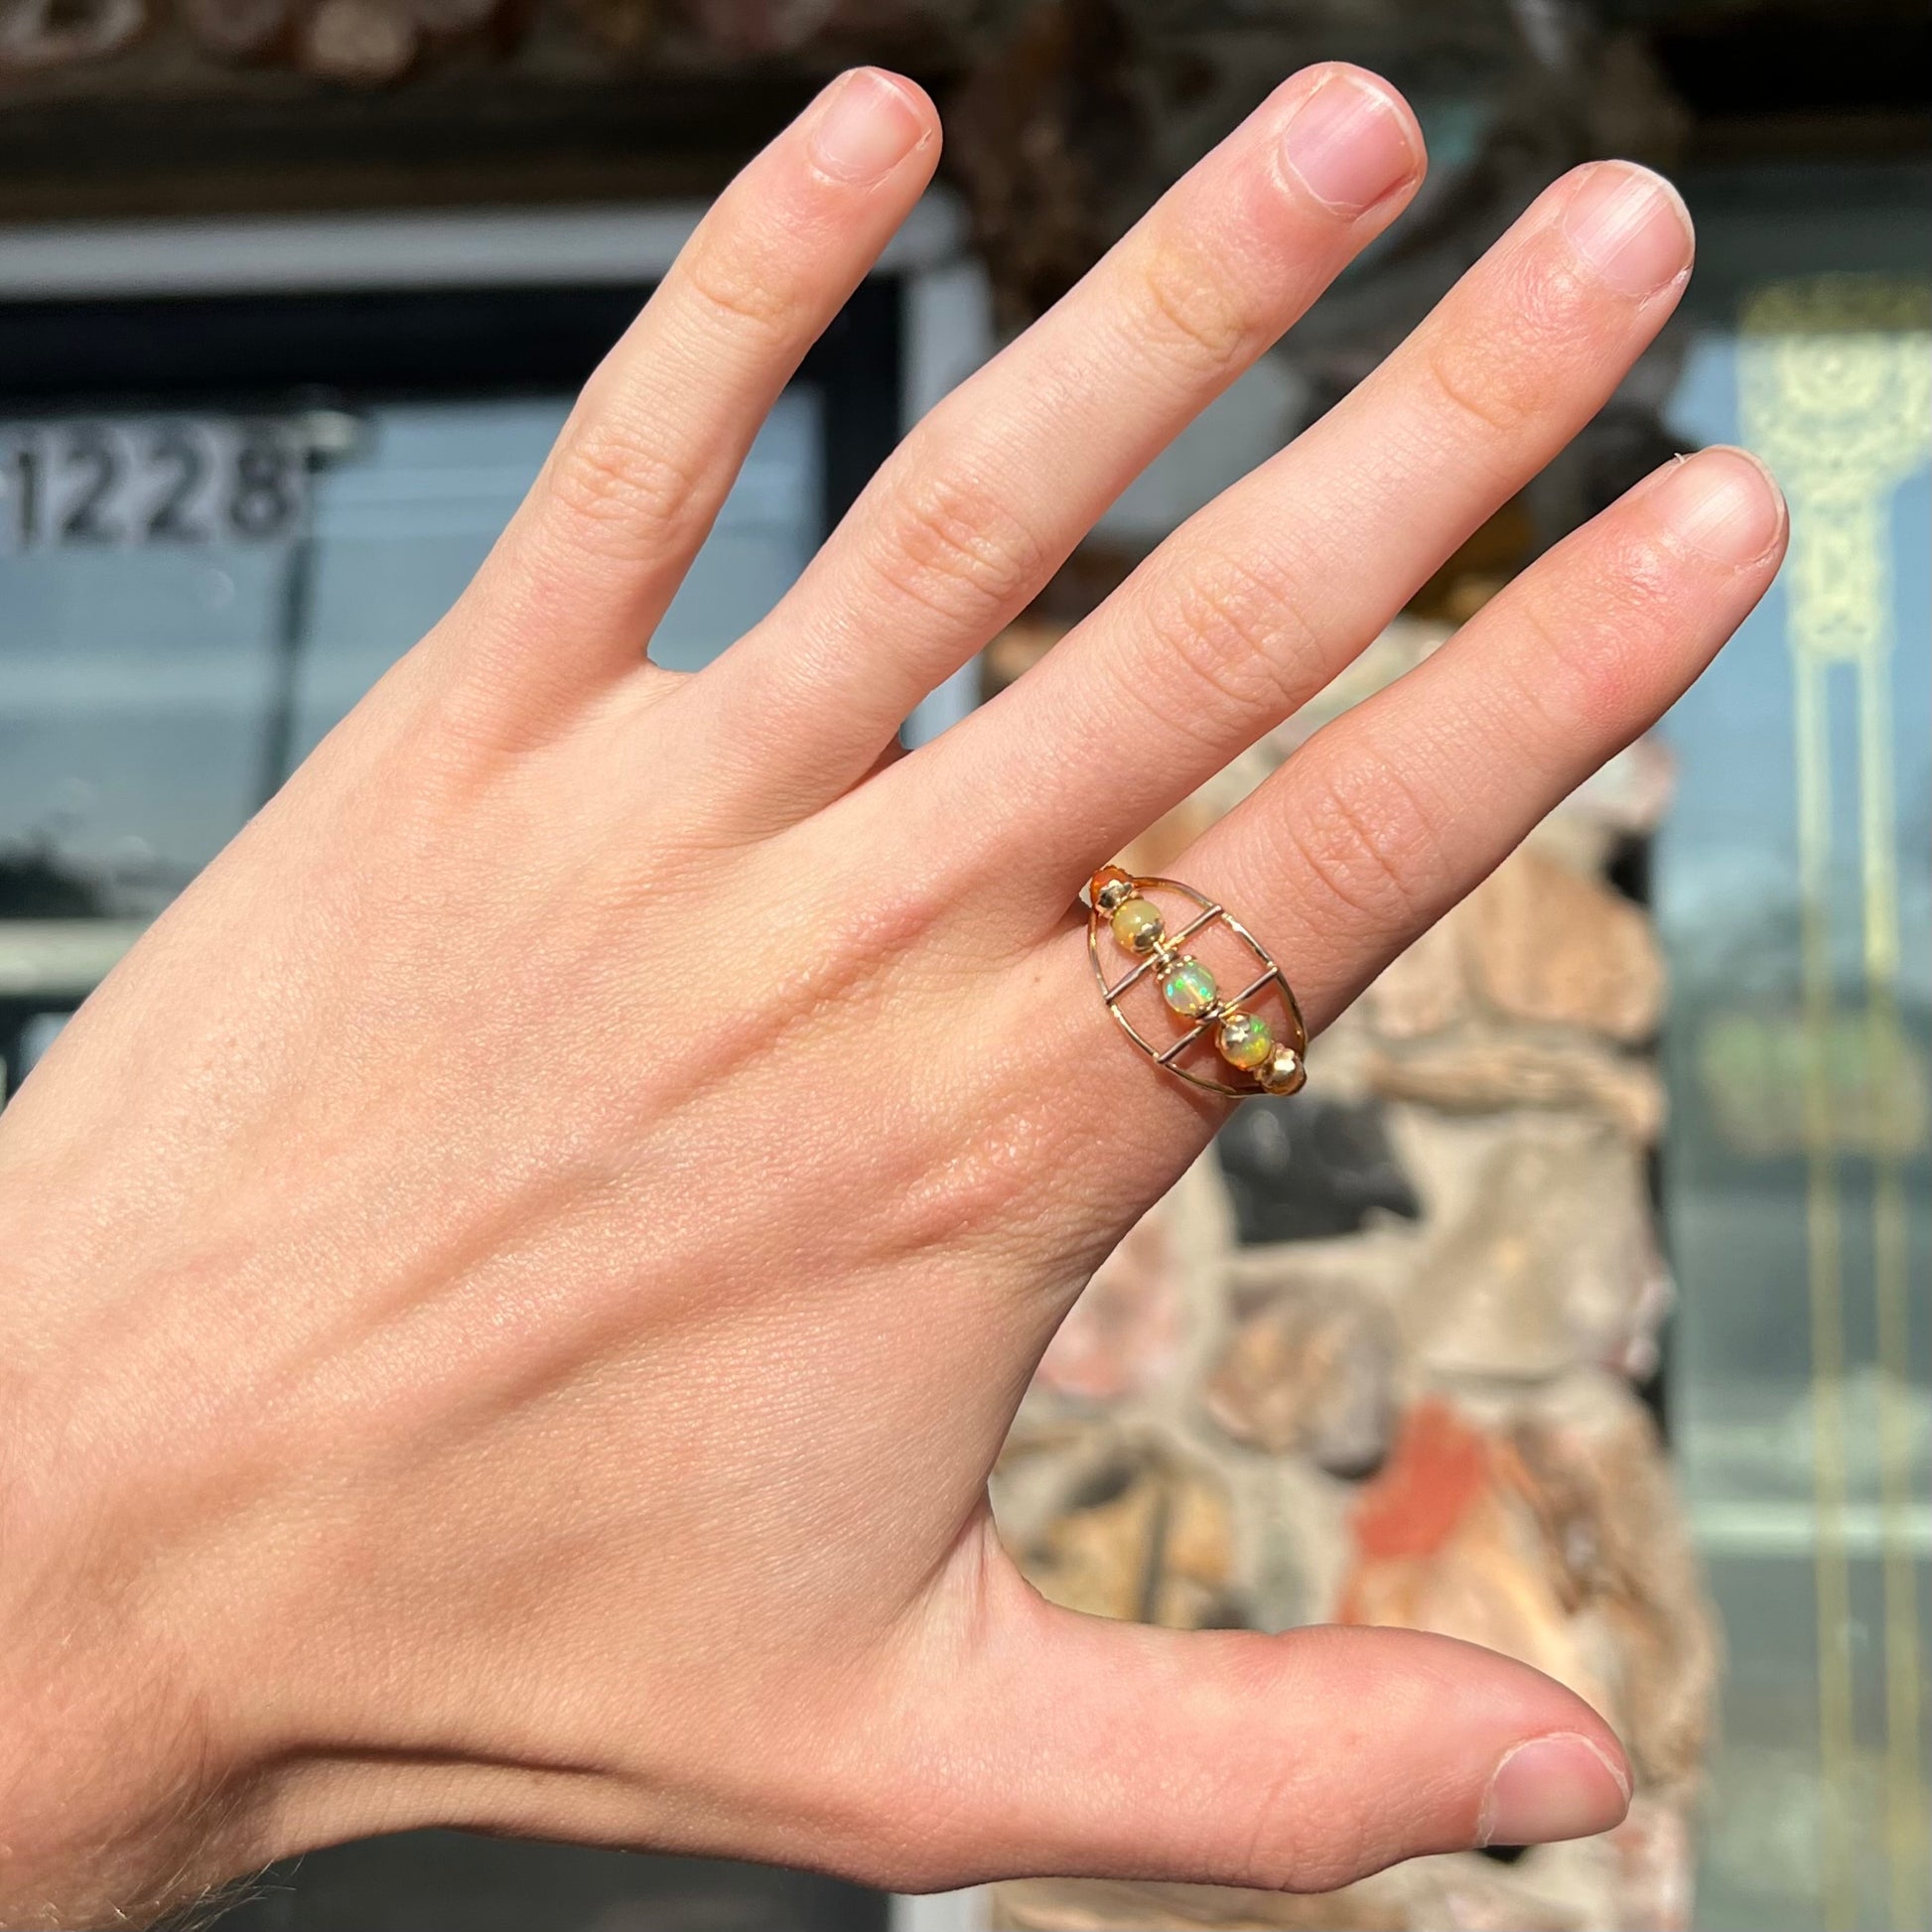 An 18 karat yellow gold ring set with five natural fire opal beads that spin along the ring.